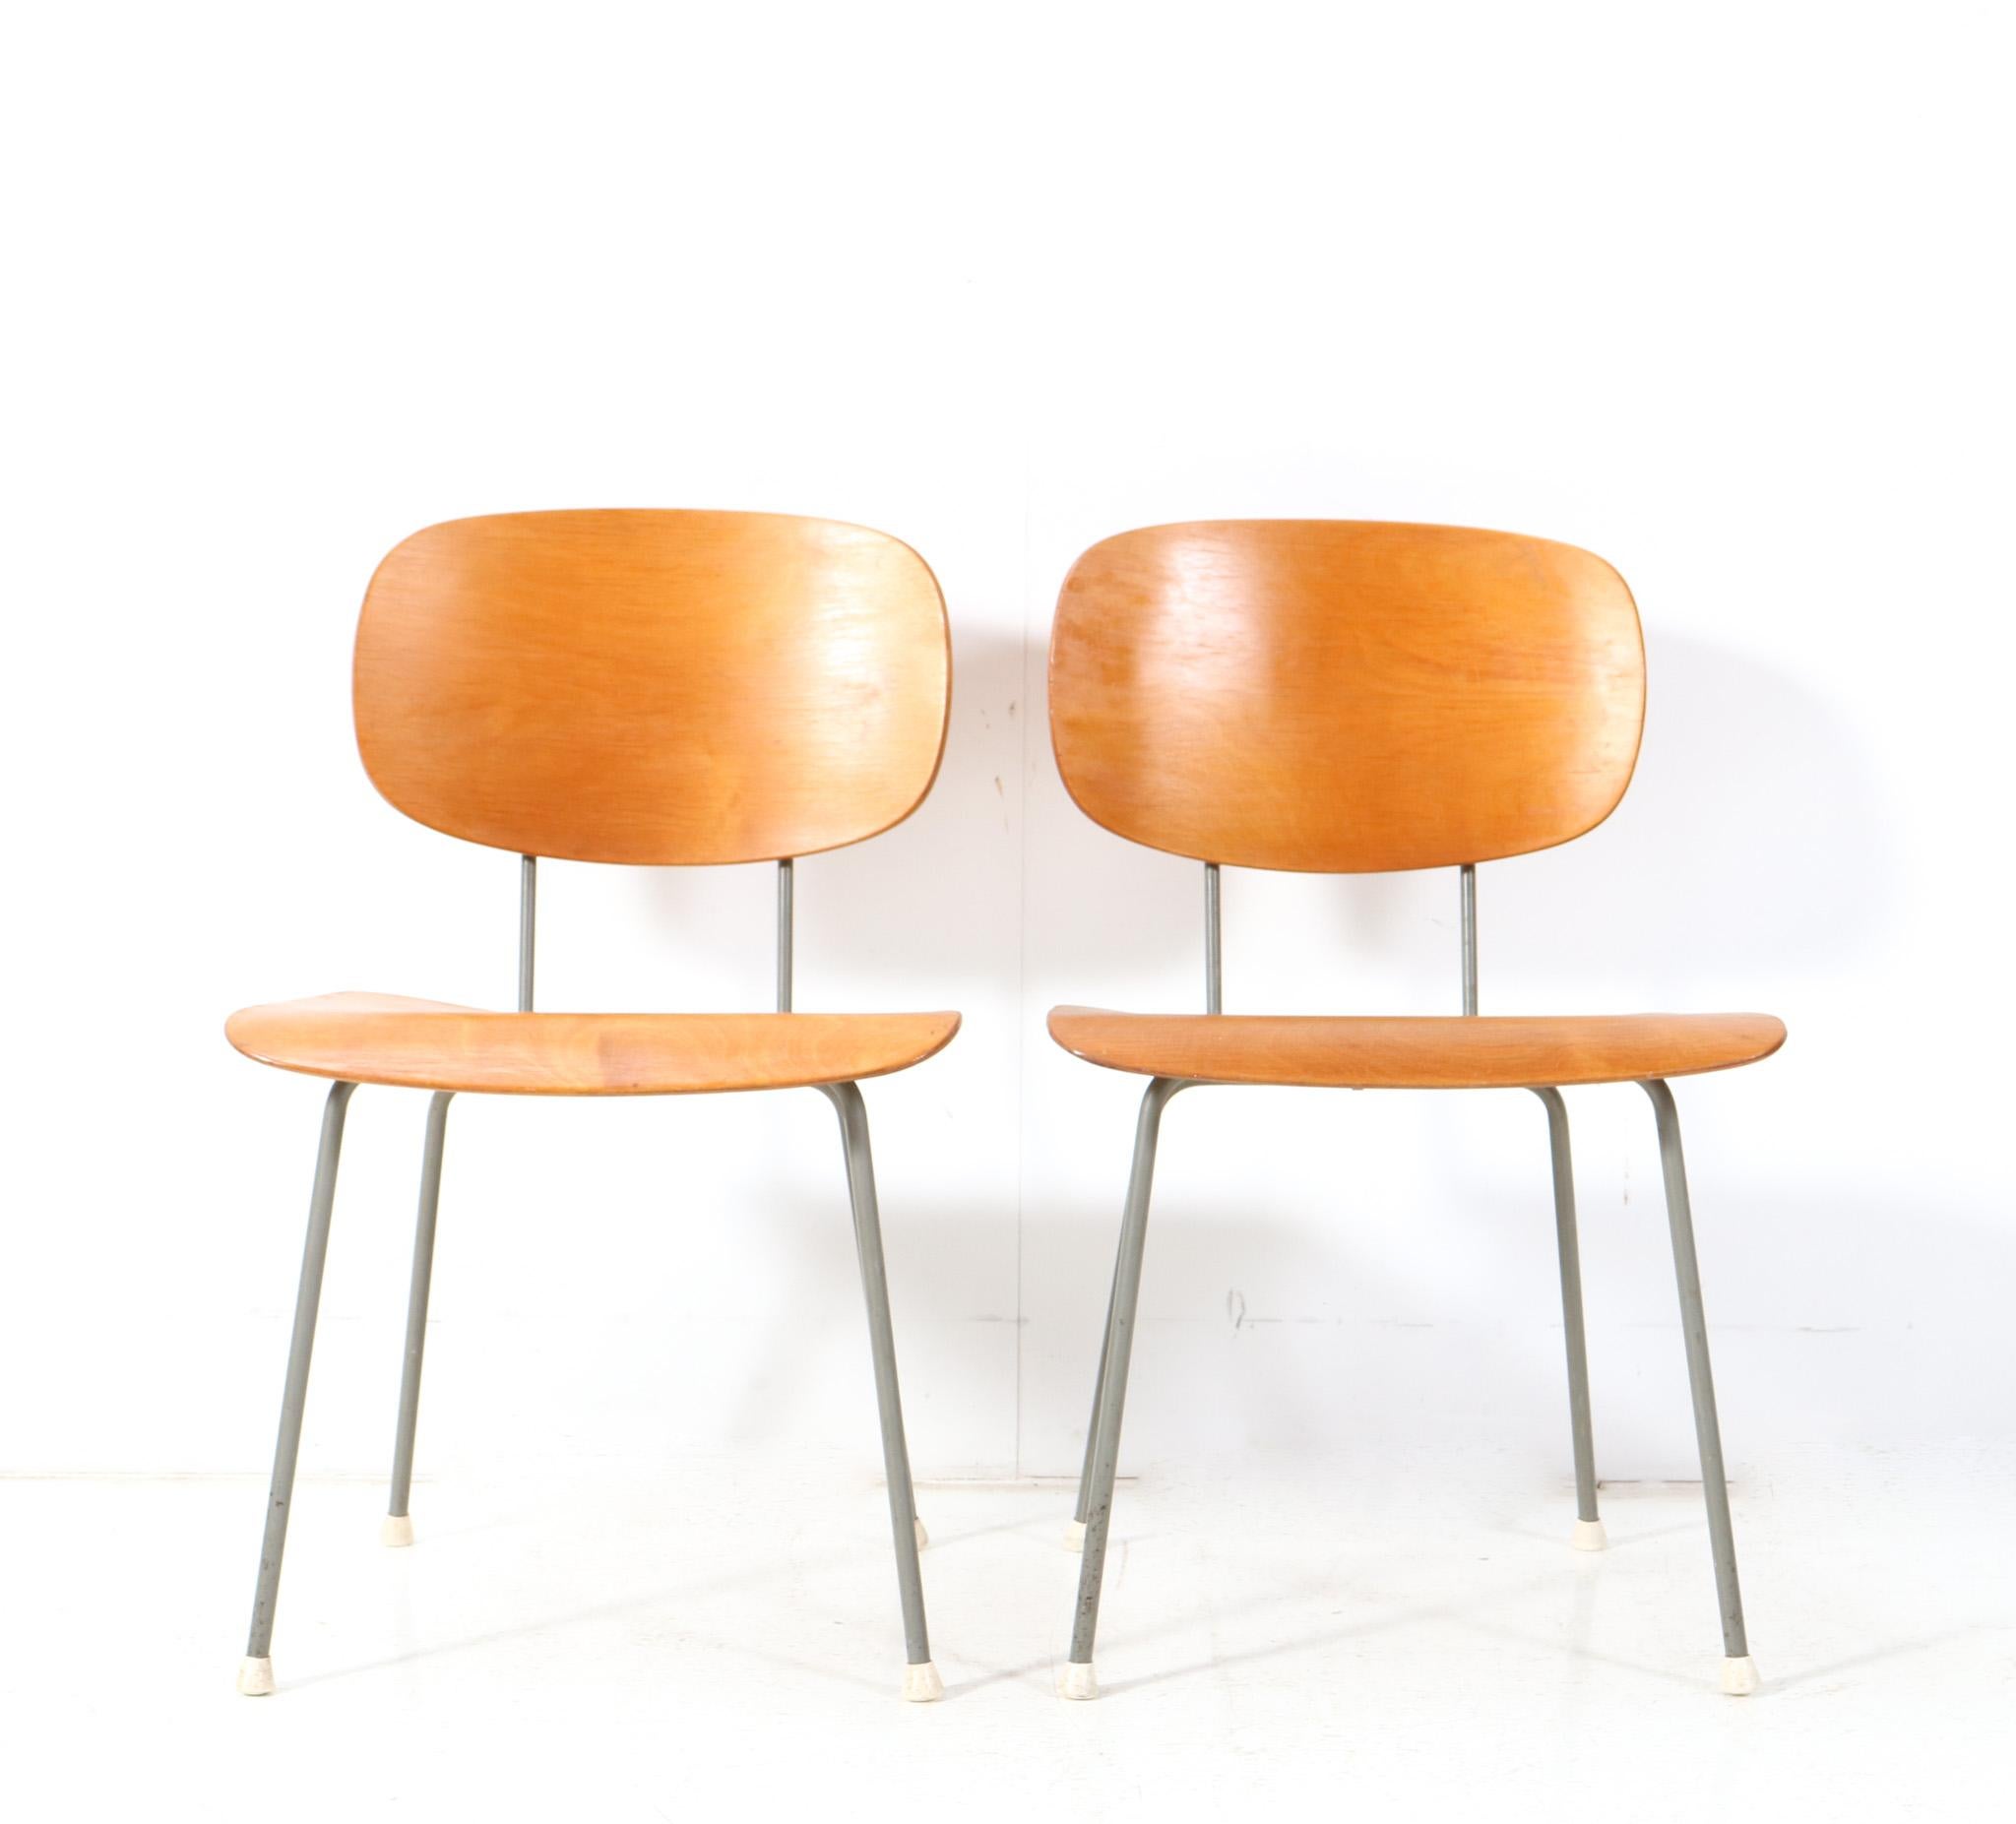 Dutch Pair of Mid-Century Modern Model 116 Side Chairs by Wim Rietveld for Gispen For Sale